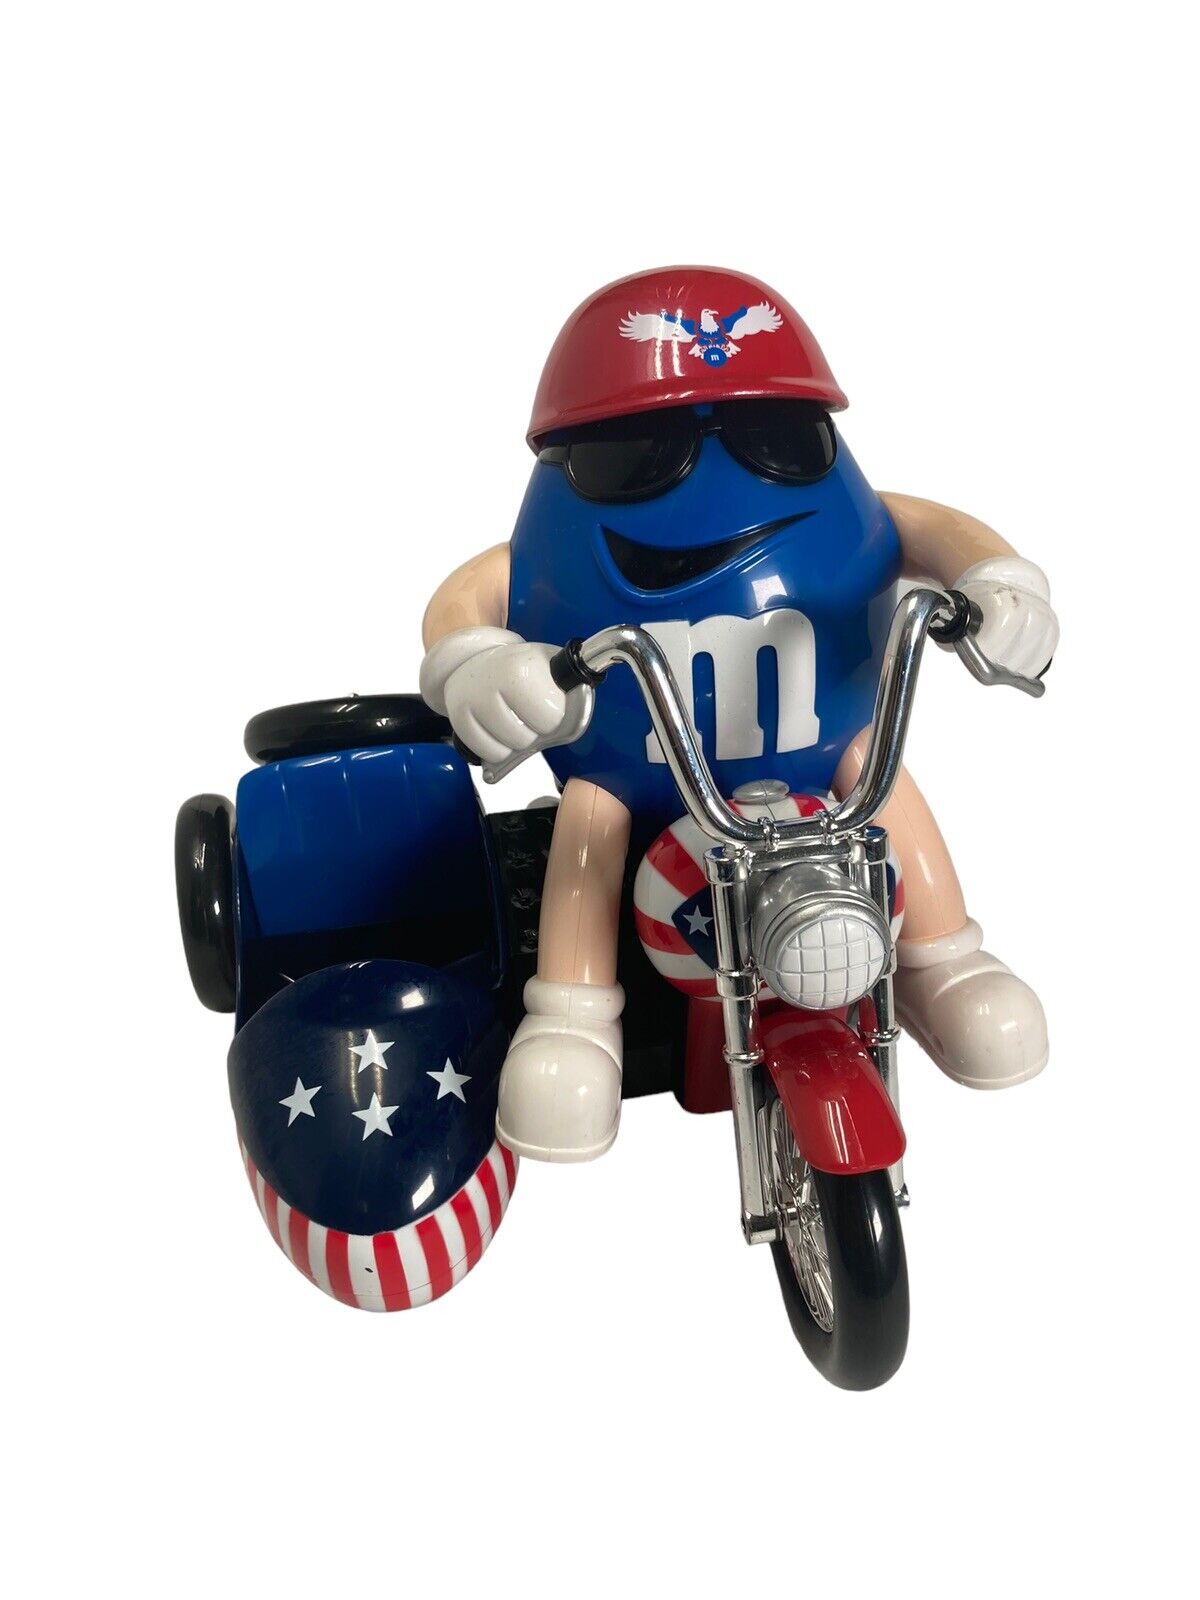 M&M Patriotic Freedom Rider Red White Blue Motorcycle Candy Dispenser No Box